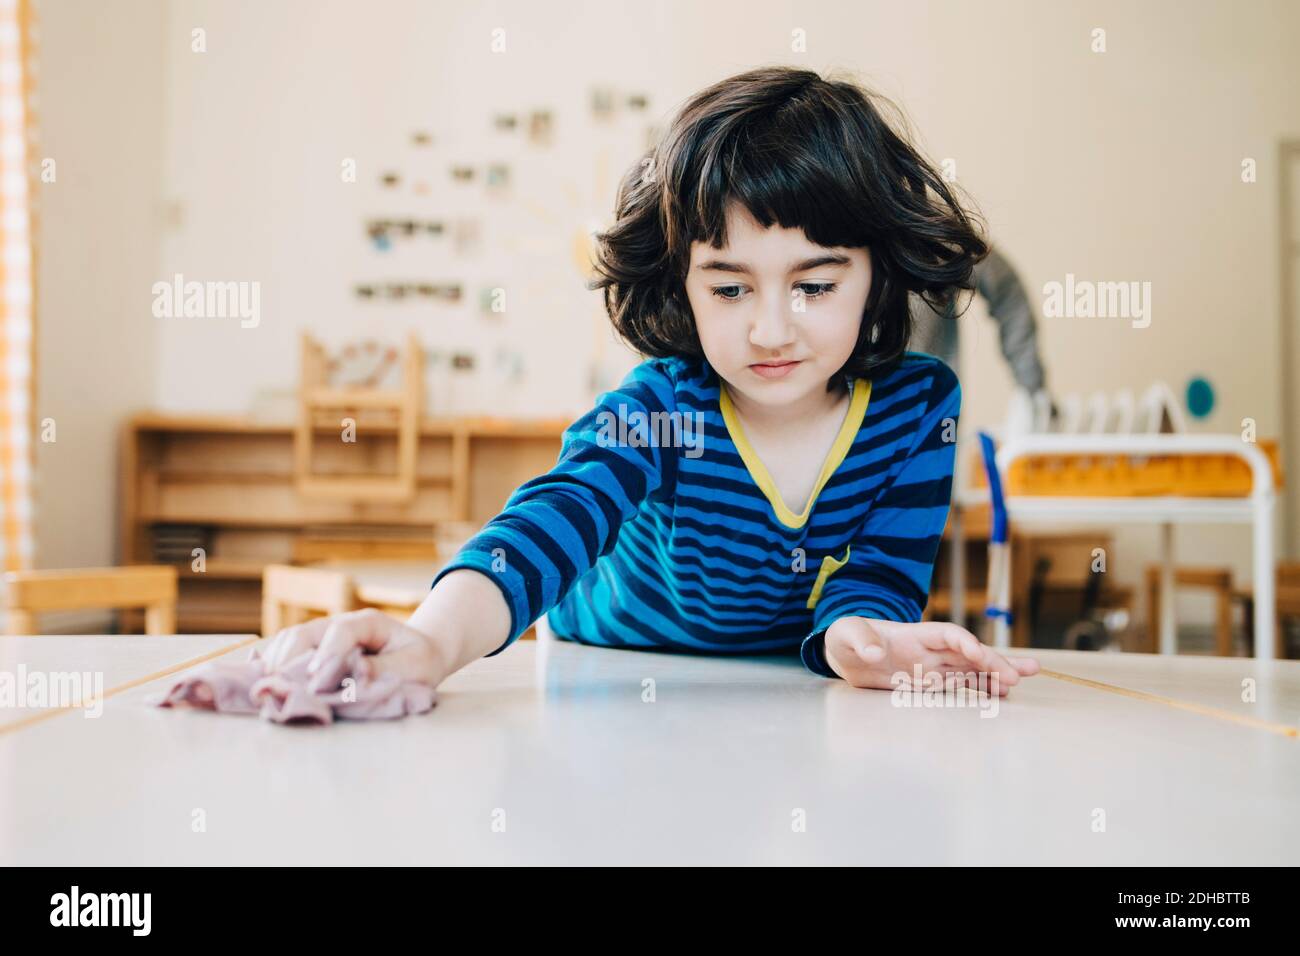 https://c8.alamy.com/comp/2DHBTTB/boy-cleaning-table-with-dish-cloth-in-child-care-classroom-2DHBTTB.jpg